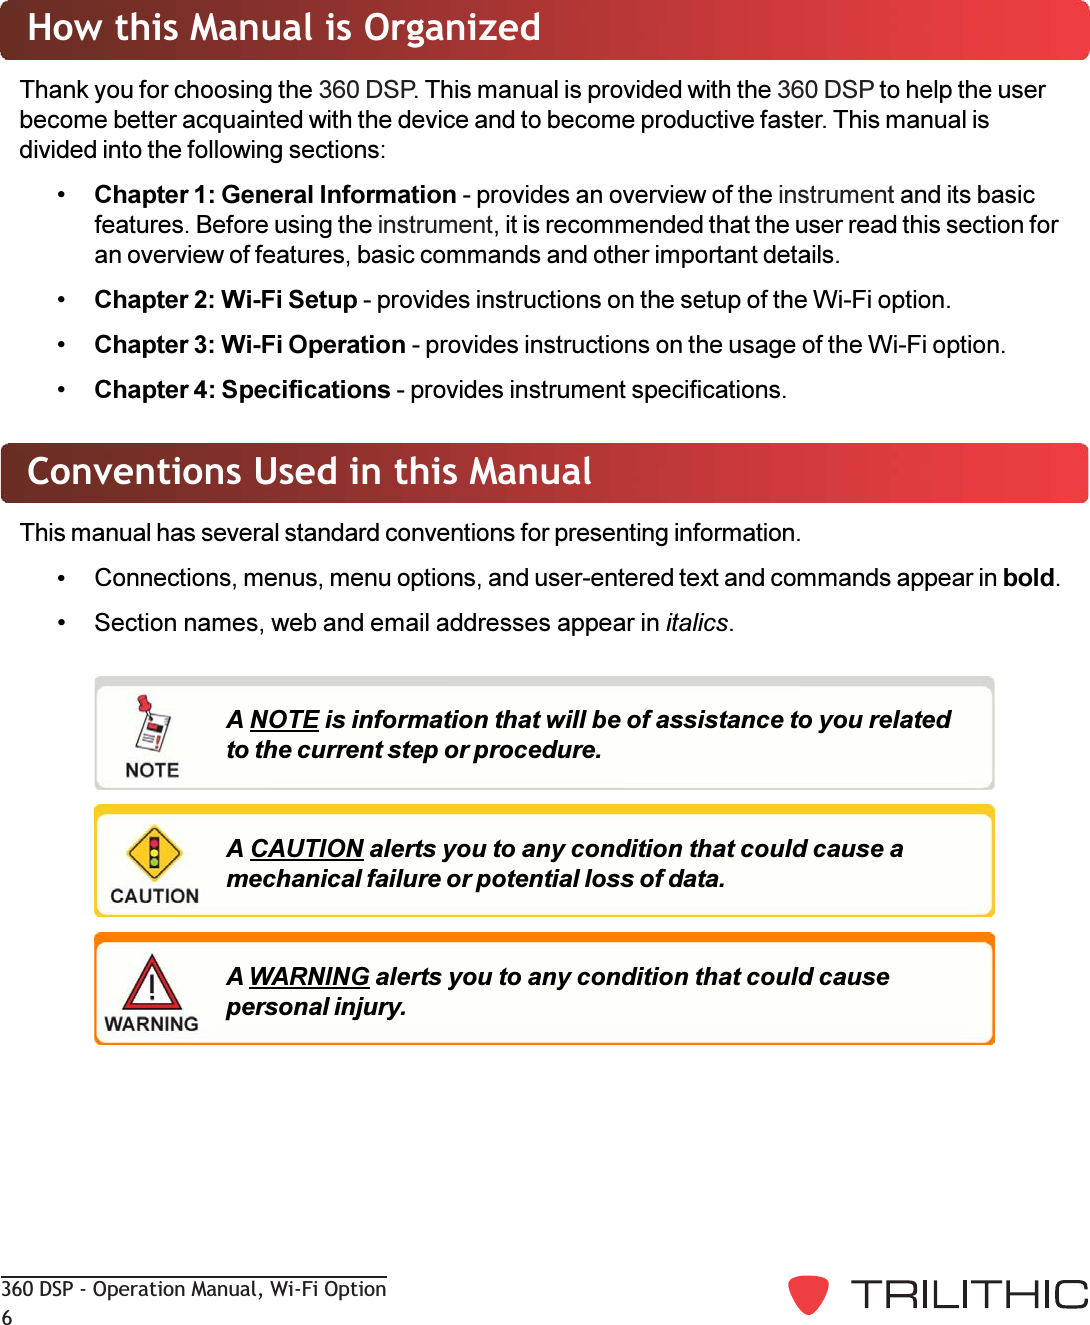 360 DSP - Operation Manual, Wi-Fi Option6Conventions Used in this ManualThis manual has several standard conventions for presenting information.Connections, menus, menu options, and user-entered text and commands appear in bold. Section names, web and email addresses appear in italics.A NOTE is information that will be of assistance to you relatedto the current step or procedure.A CAUTION alerts you to any condition that could cause amechanical failure or potential loss of data.A WARNING alerts you to any condition that could causepersonal injury.How this Manual is OrganizedThank you for choosing the 360 DSP. This manual is provided with the 360 DSP to help the userbecome better acquainted with the device and to become productive faster. This manual isdivided into the following sections:Chapter 1: General Information - provides an overview of the instrument and its basicfeatures. Before using the instrument, it is recommended that the user read this section foran overview of features, basic commands and other important details.Chapter 2: Wi-Fi Setup - provides instructions on the setup of the Wi-Fi option.Chapter 3: Wi-Fi Operation - provides instructions on the usage of the Wi-Fi option.Chapter 4: Specifications - provides instrument specifications.